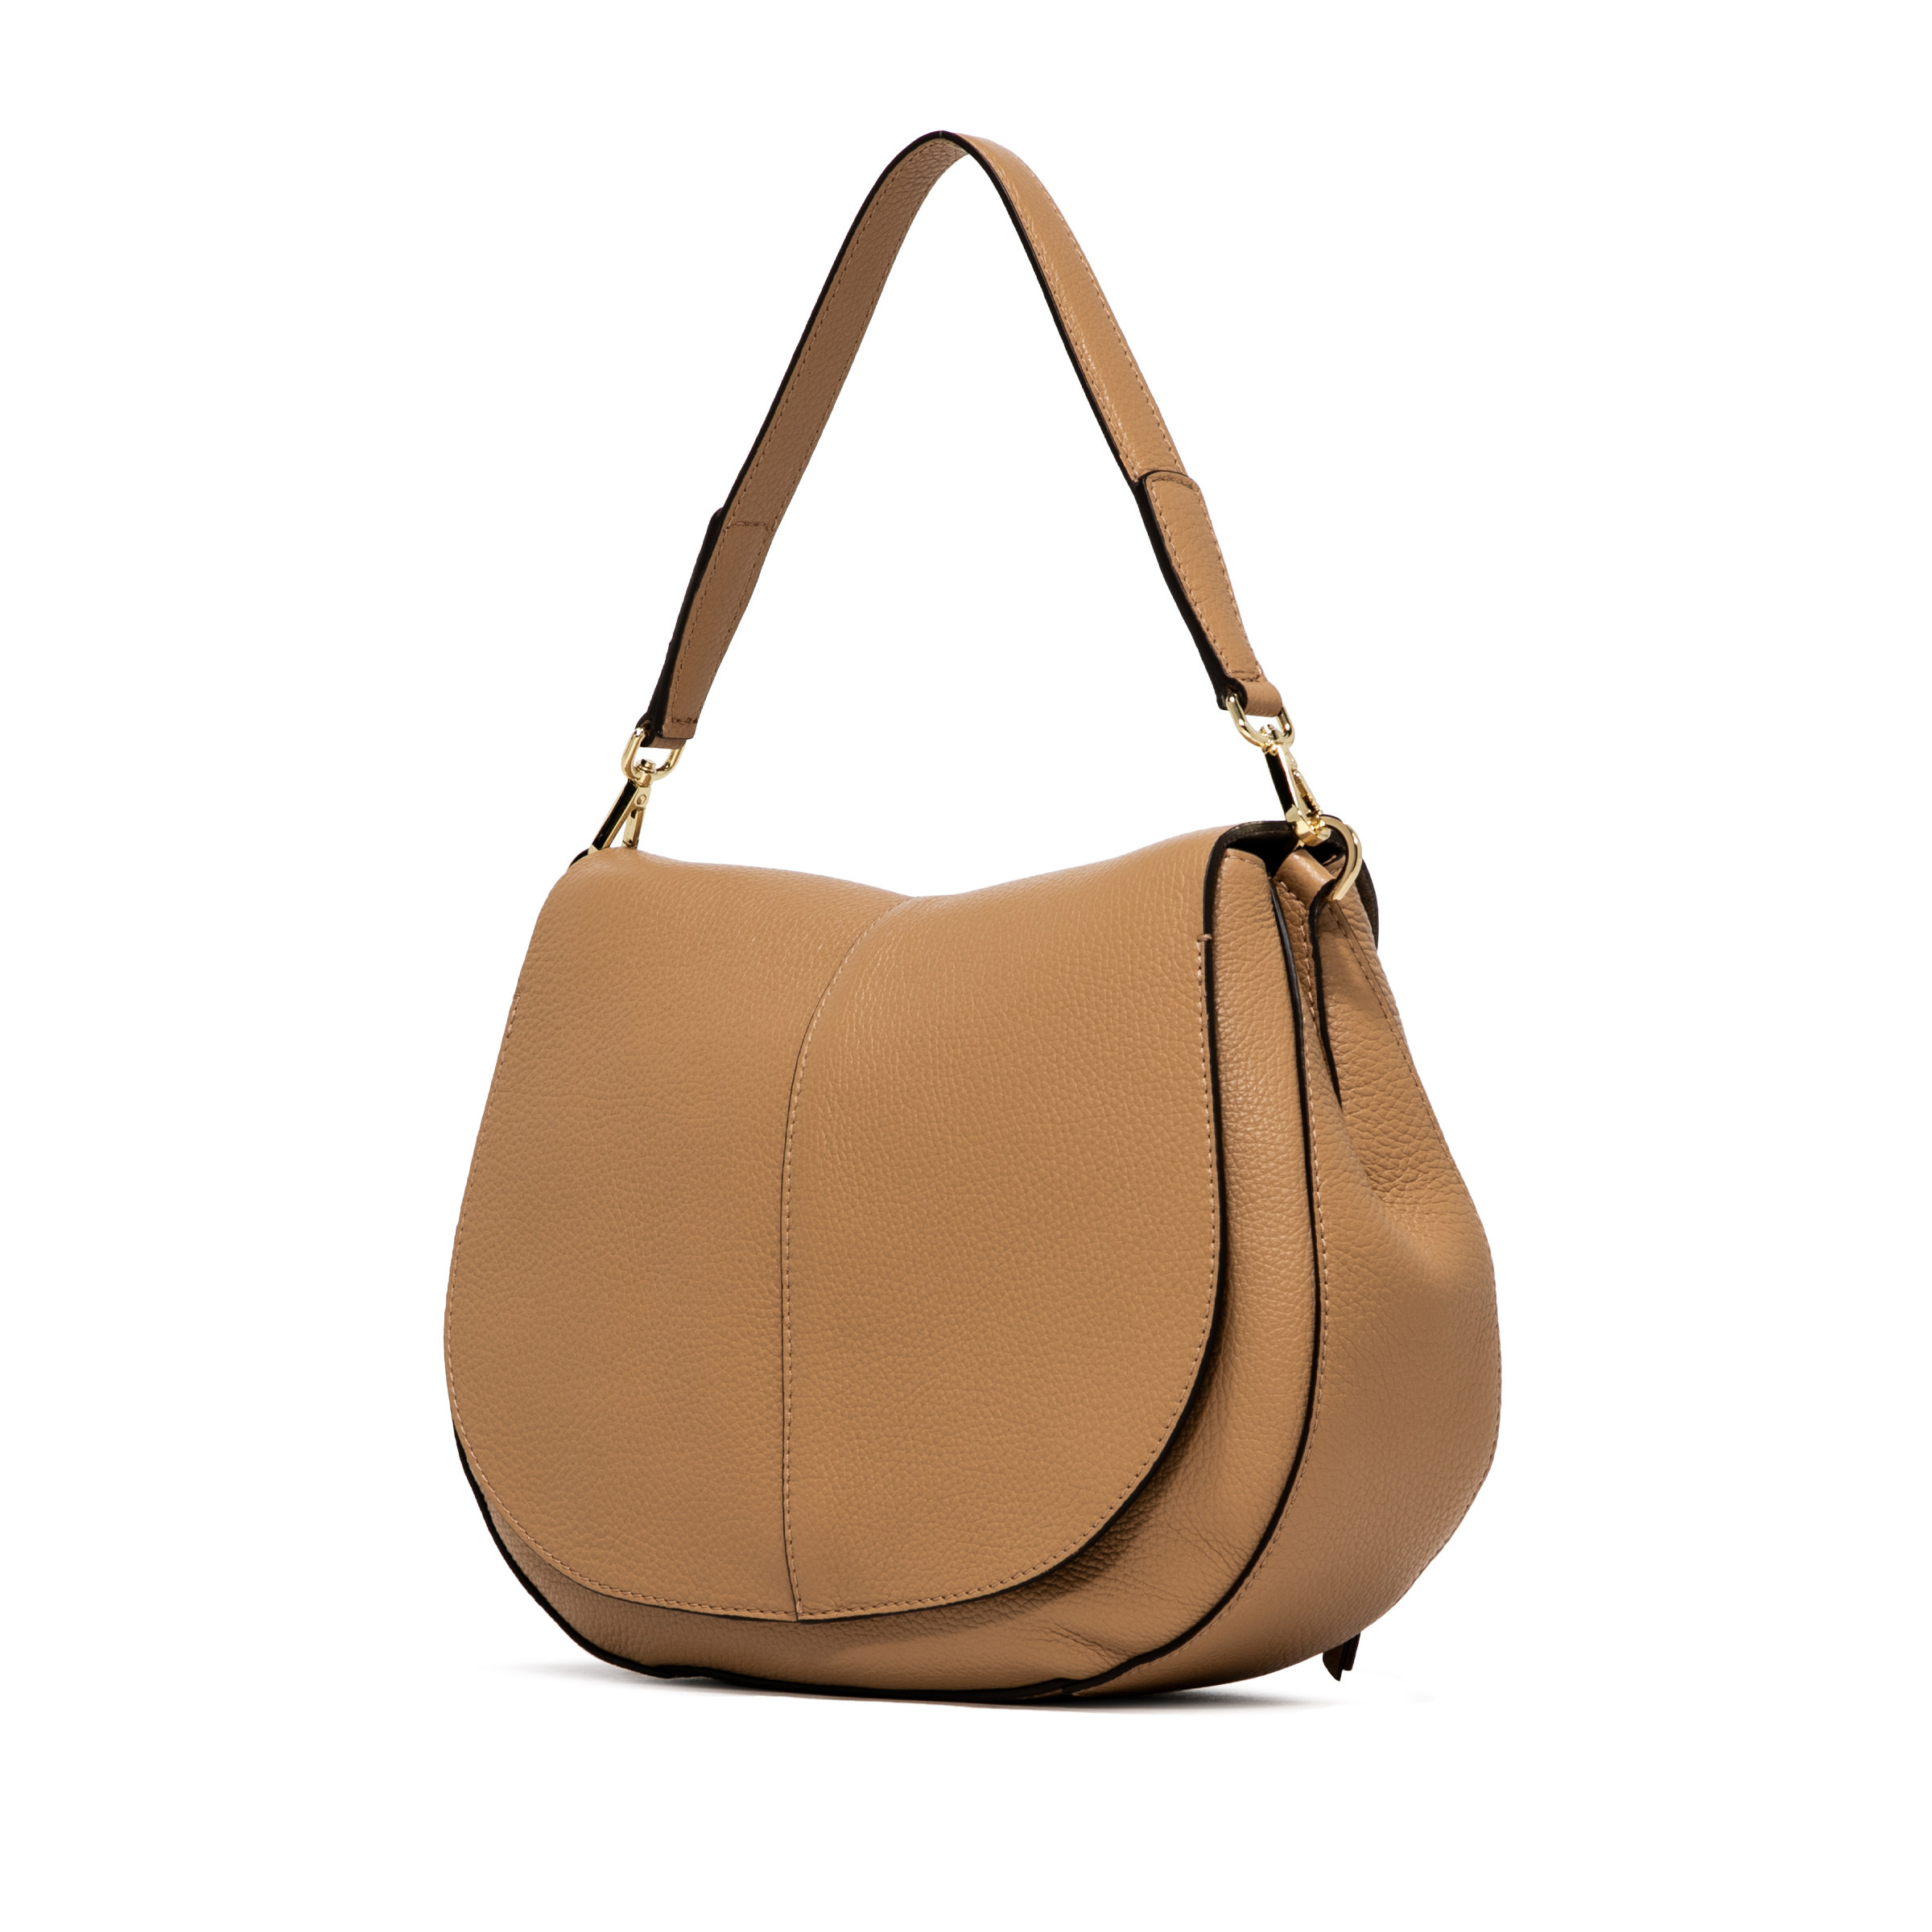 Gianni Chiarini - Helena Round bag in leather, Natural, large image number 2